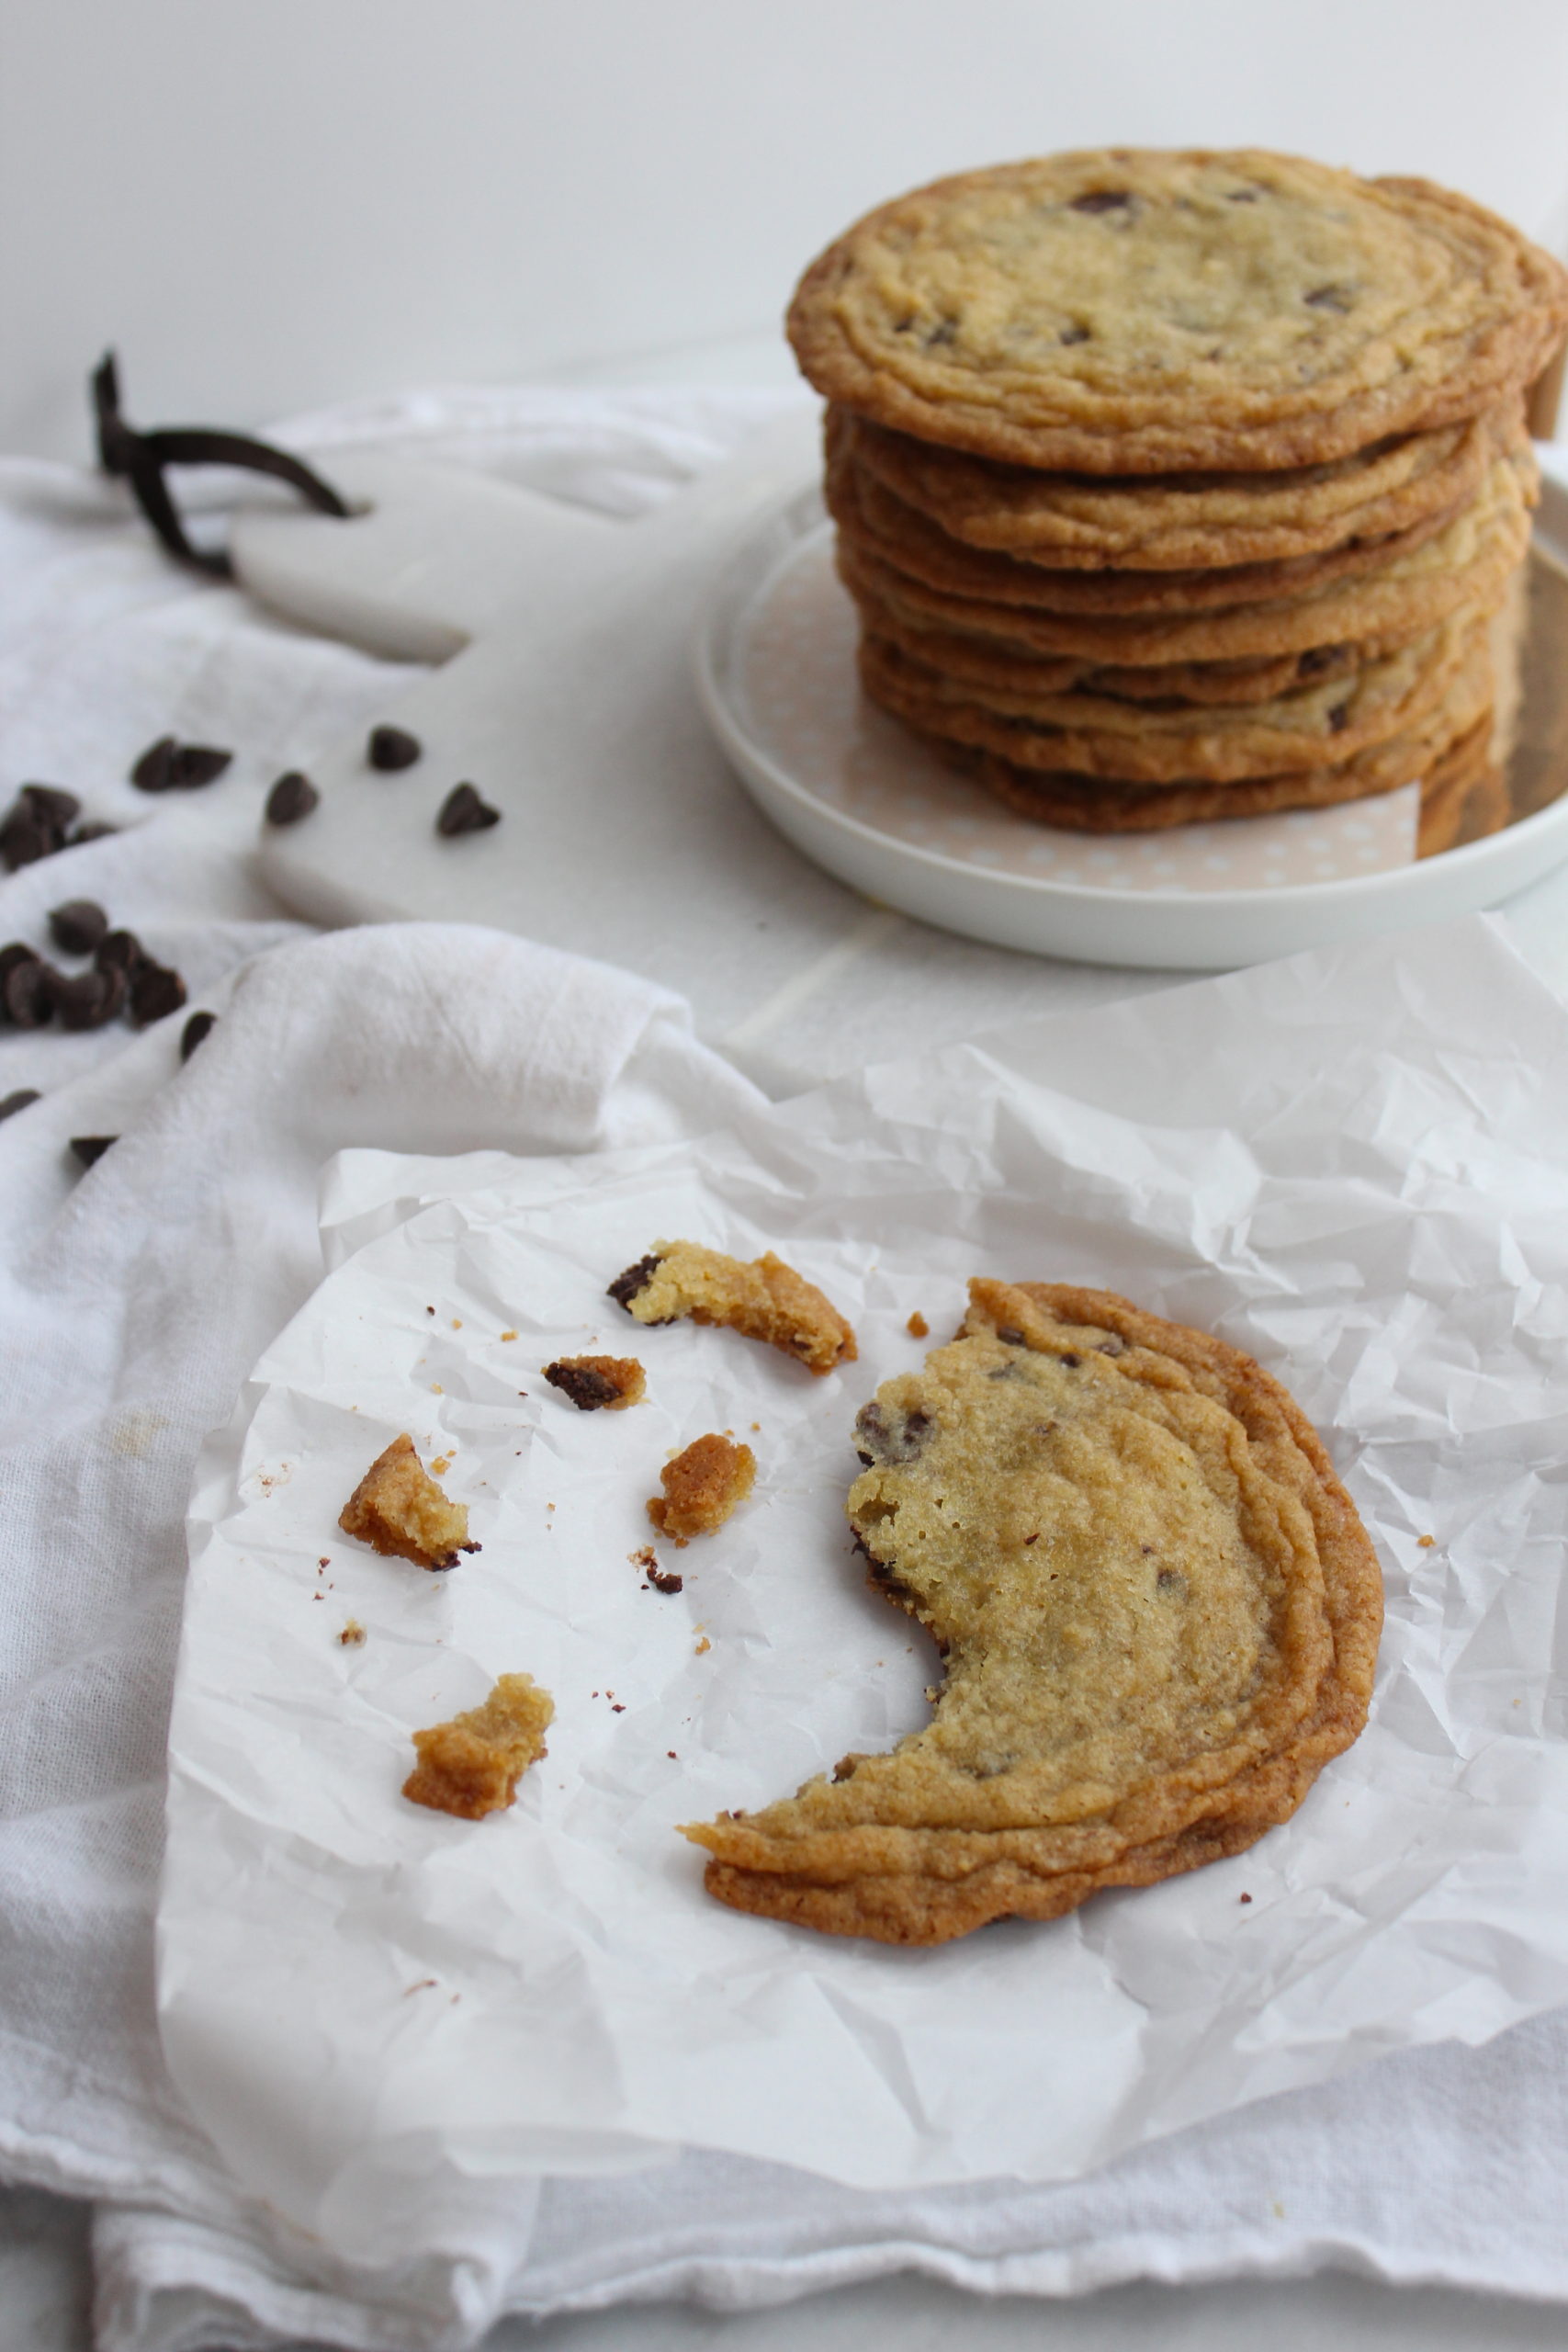 https://sohappyyoulikedit.com/wp-content/uploads/2018/03/Pan-Banging-Chocolate-Chip-Cookies4-scaled.jpg?is-pending-load=1